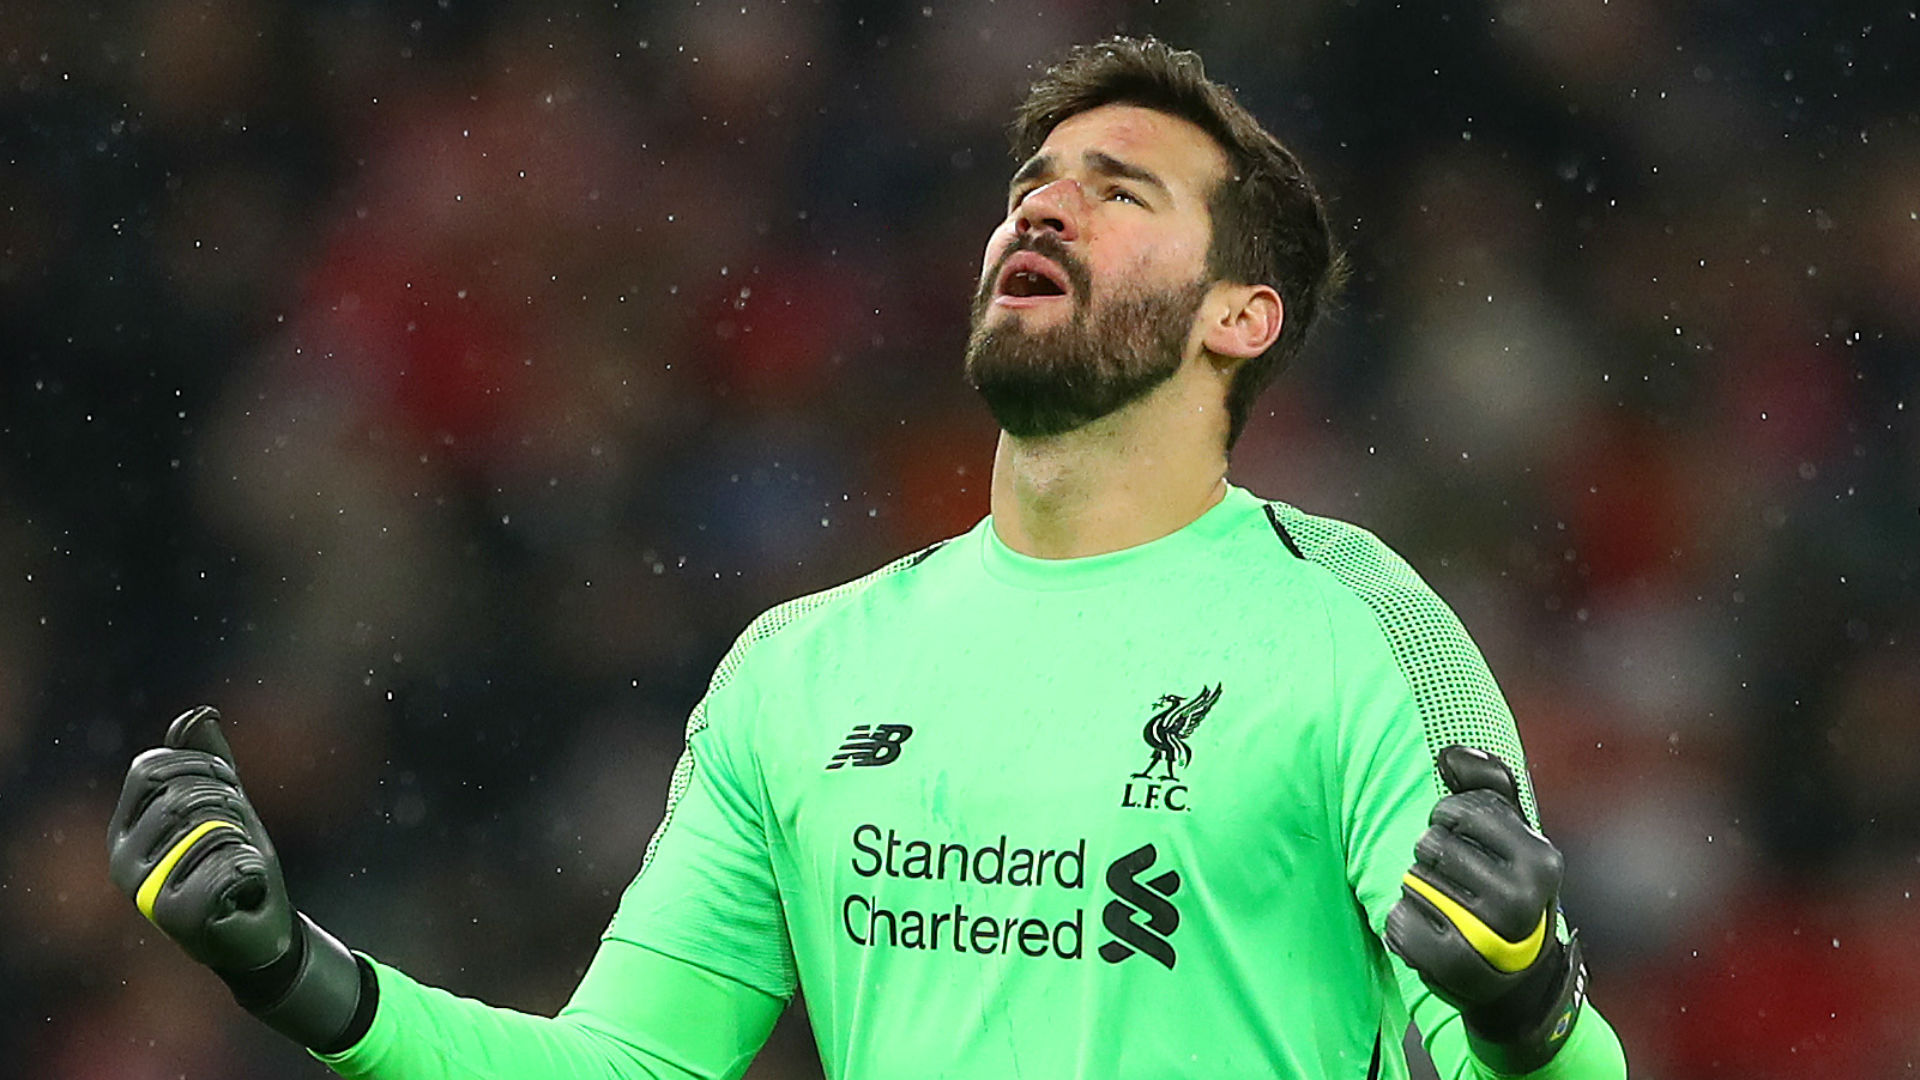 Liverpool consider offering goalkeeper deal as Alisson injury crisis bites1920 x 1080